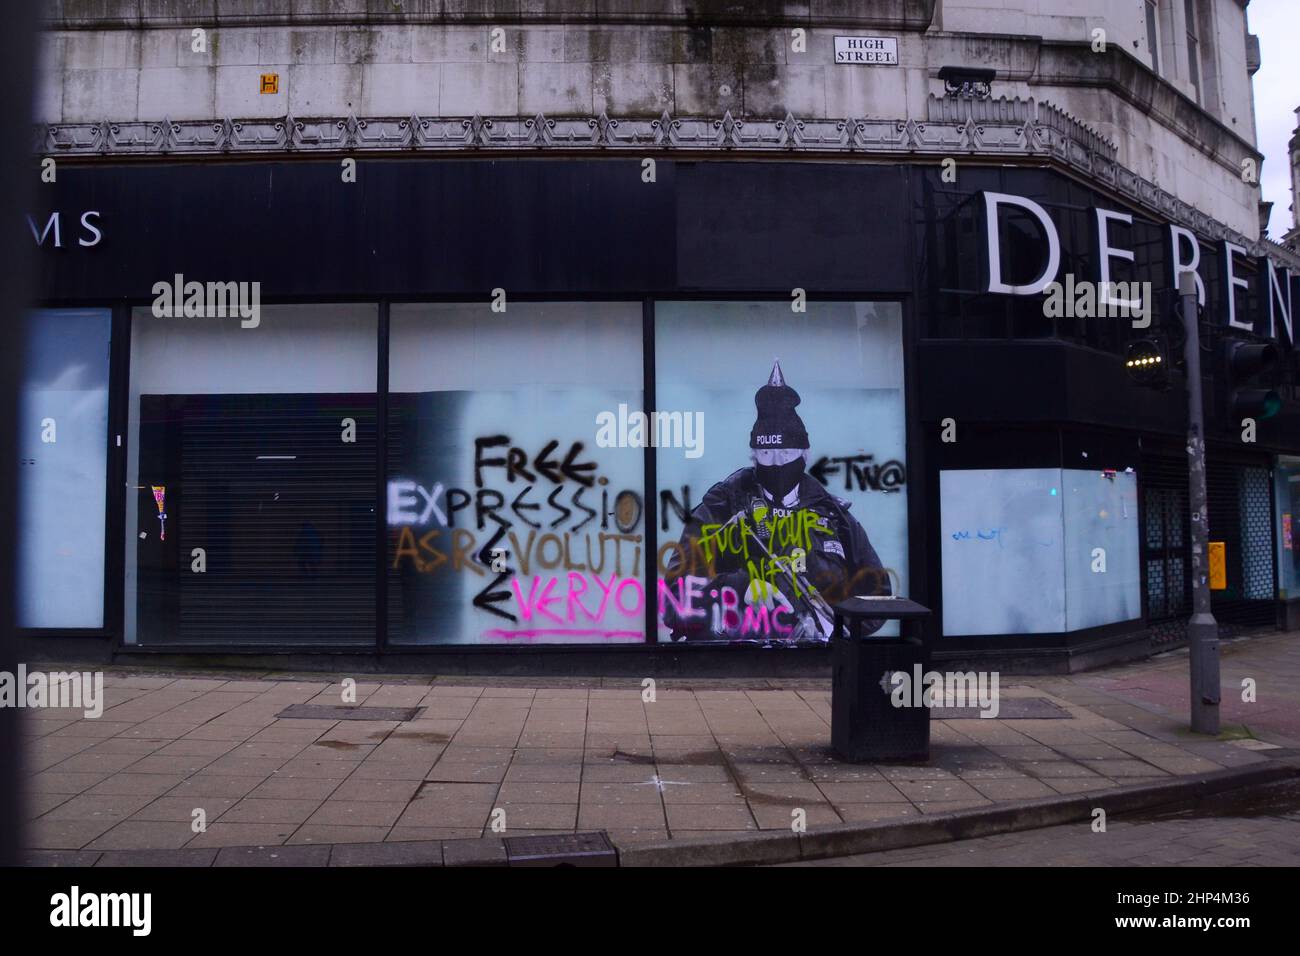 Manchester, UK, 18th February, 2022.  A humorous mural featuring UK Prime Minister Boris Johnson on the old Debenhams store in central Manchester, UK, has been vandalised twice so far with graffiti. Produced by 'Foka Wolf', a street artist, the mural has Boris Johnson's head, wearing a party hat, on top of an image of an armed police officer. There is a police investigation into parties at 10 Downing Street during the Covid-19 lockdowns. The artist has mentioned what he sees as the Government's 'double standards'. Credit: Terry Waller/Alamy Live News Stock Photo